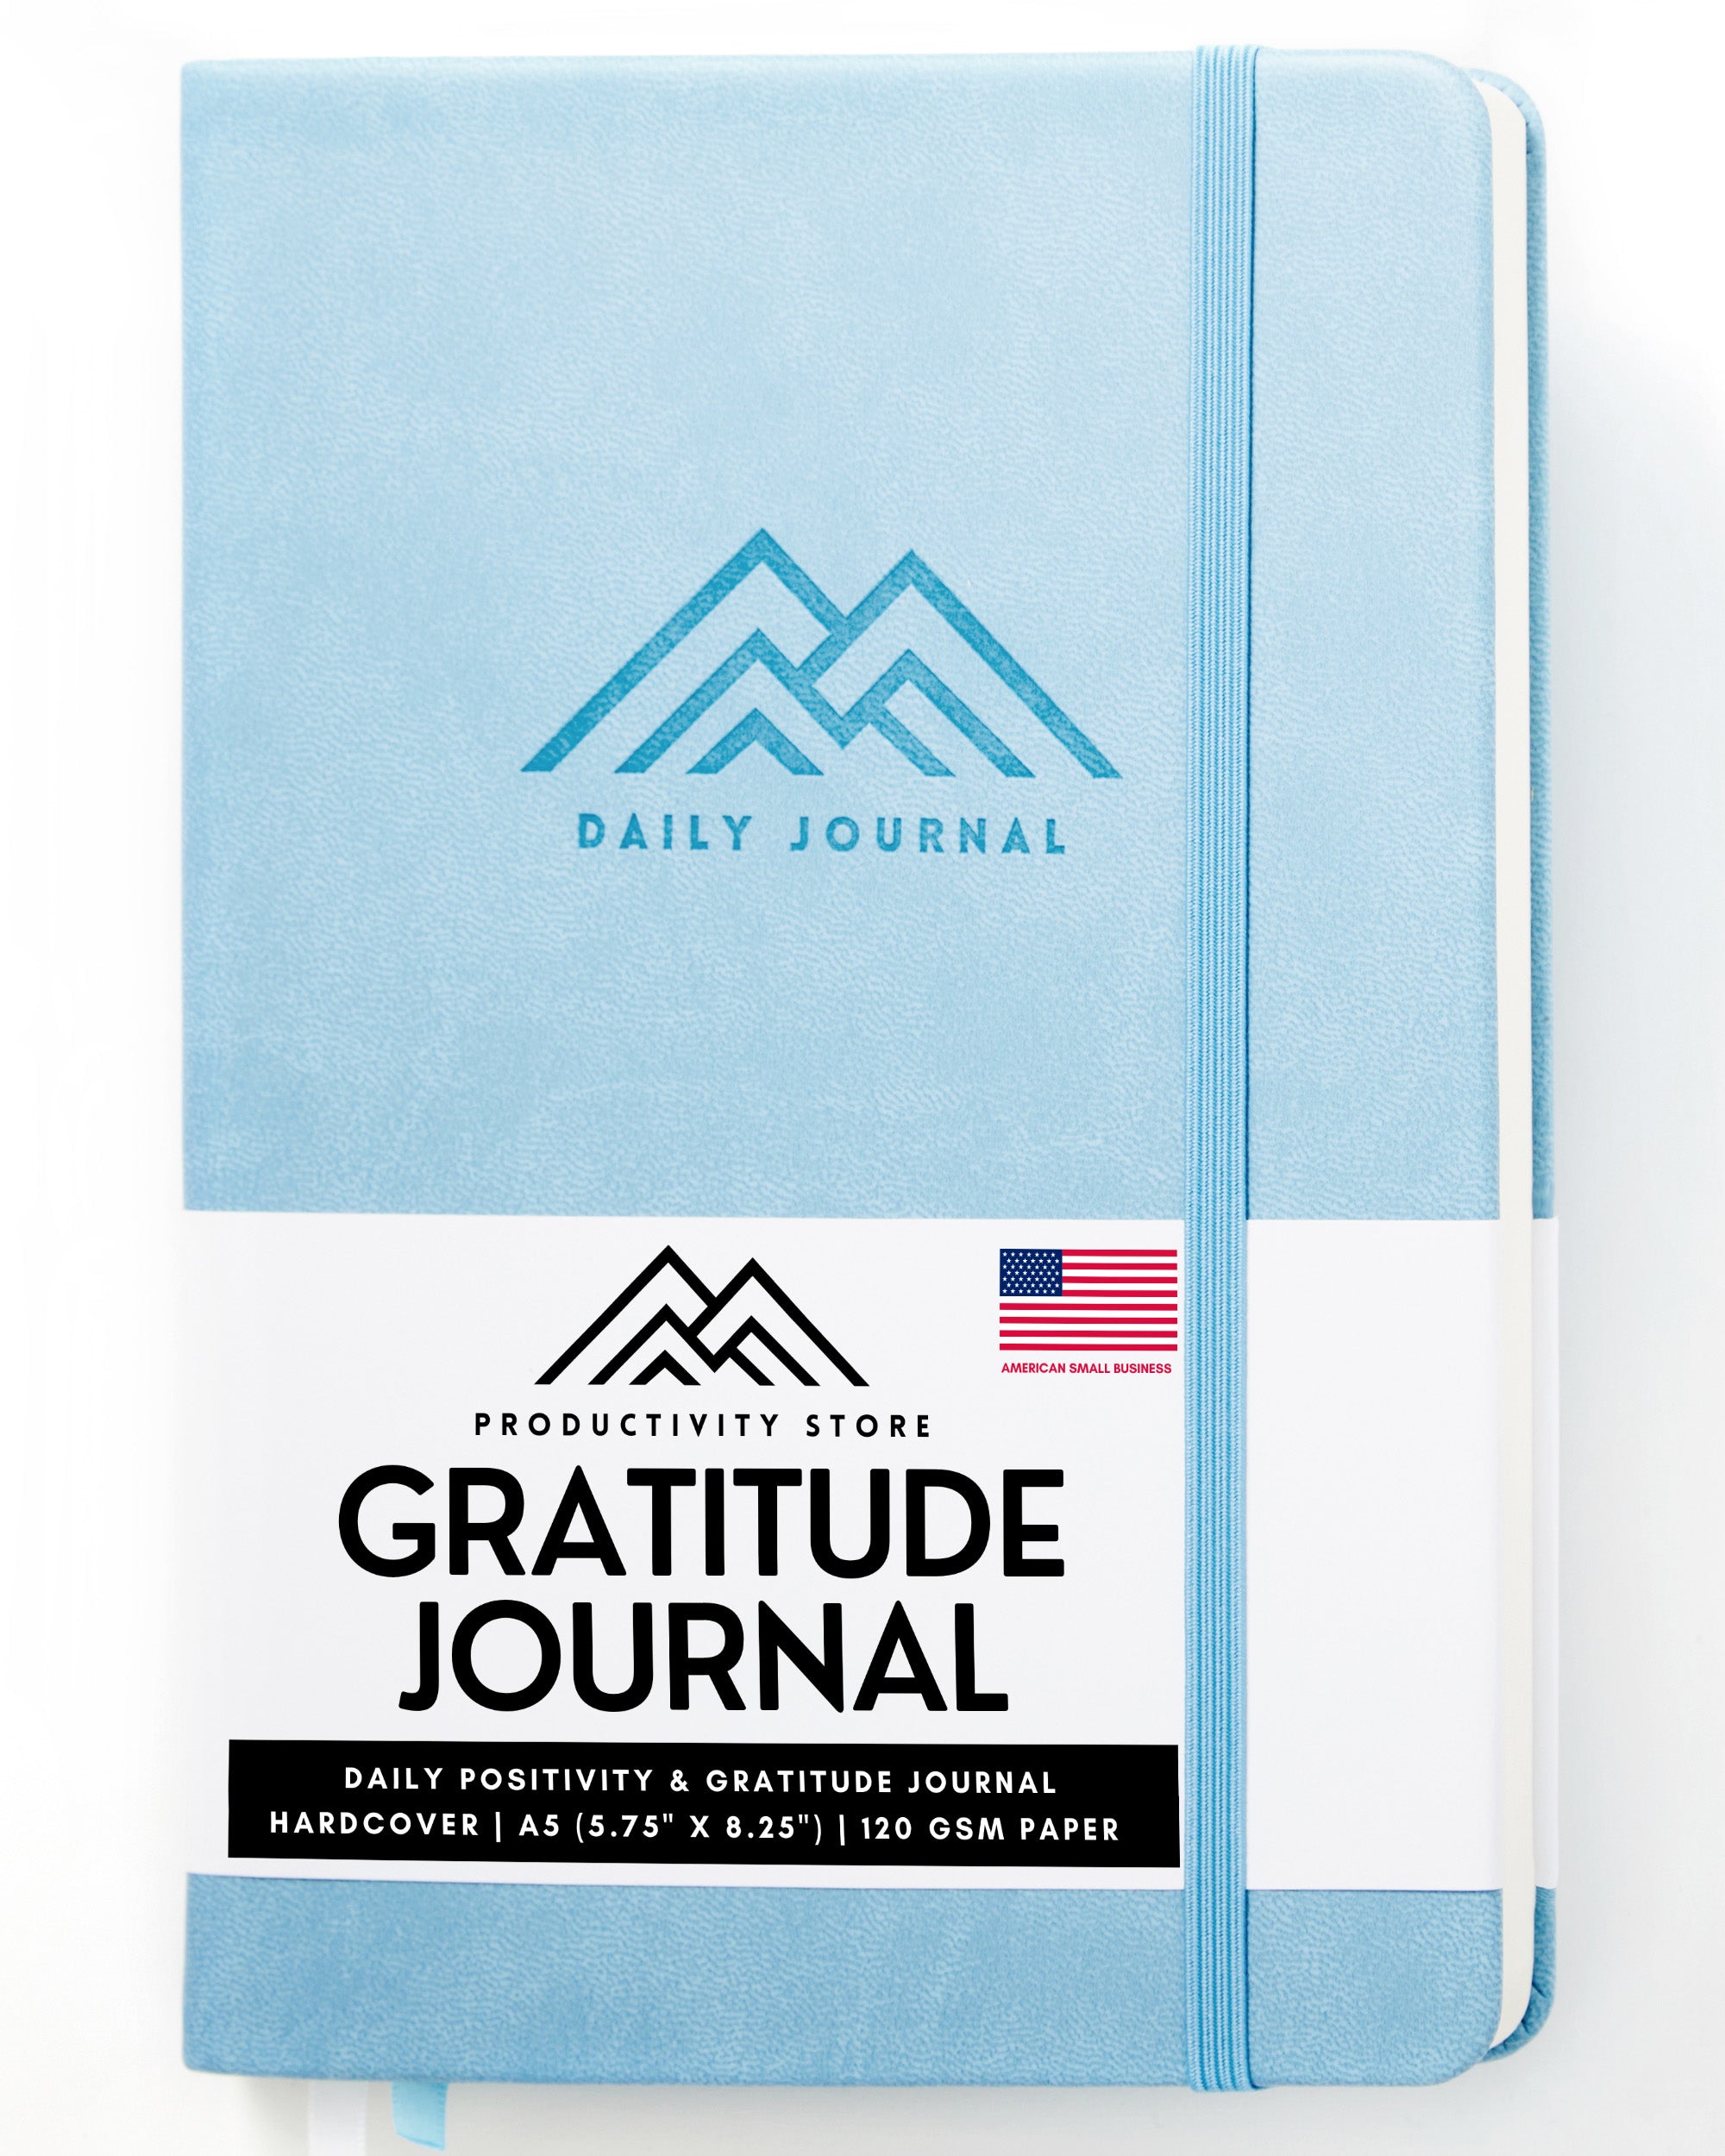 Gratitude Journal Research: The Latest Findings and What They Mean